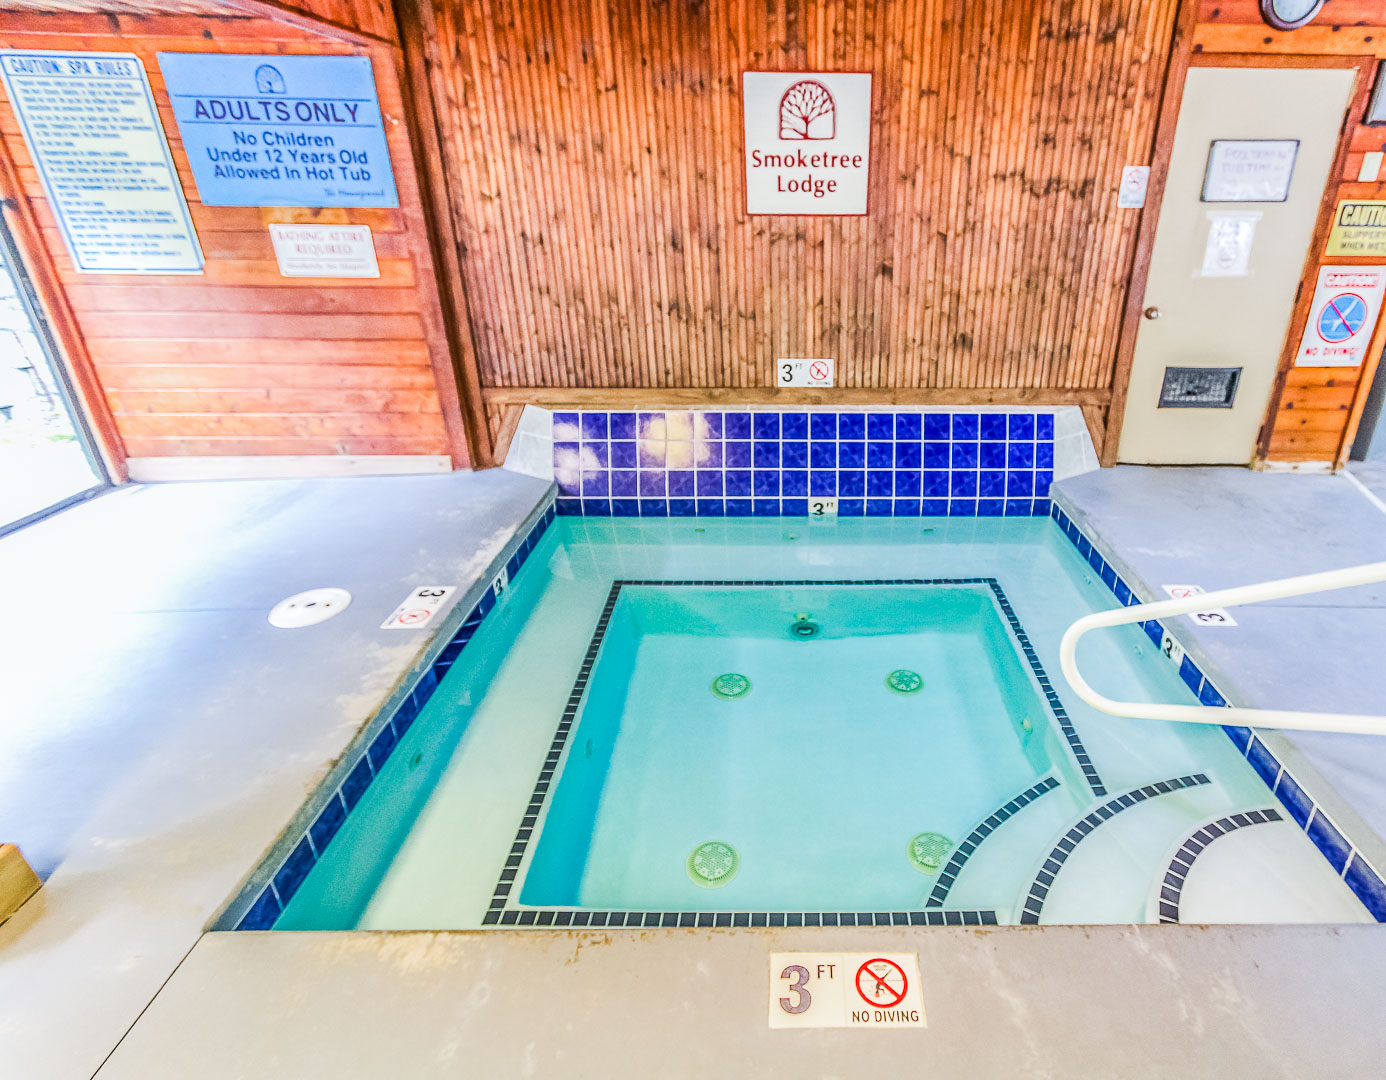 A relaxin indoor Jacuzzi at VRI's Smoketree Lodge in North Carolina.